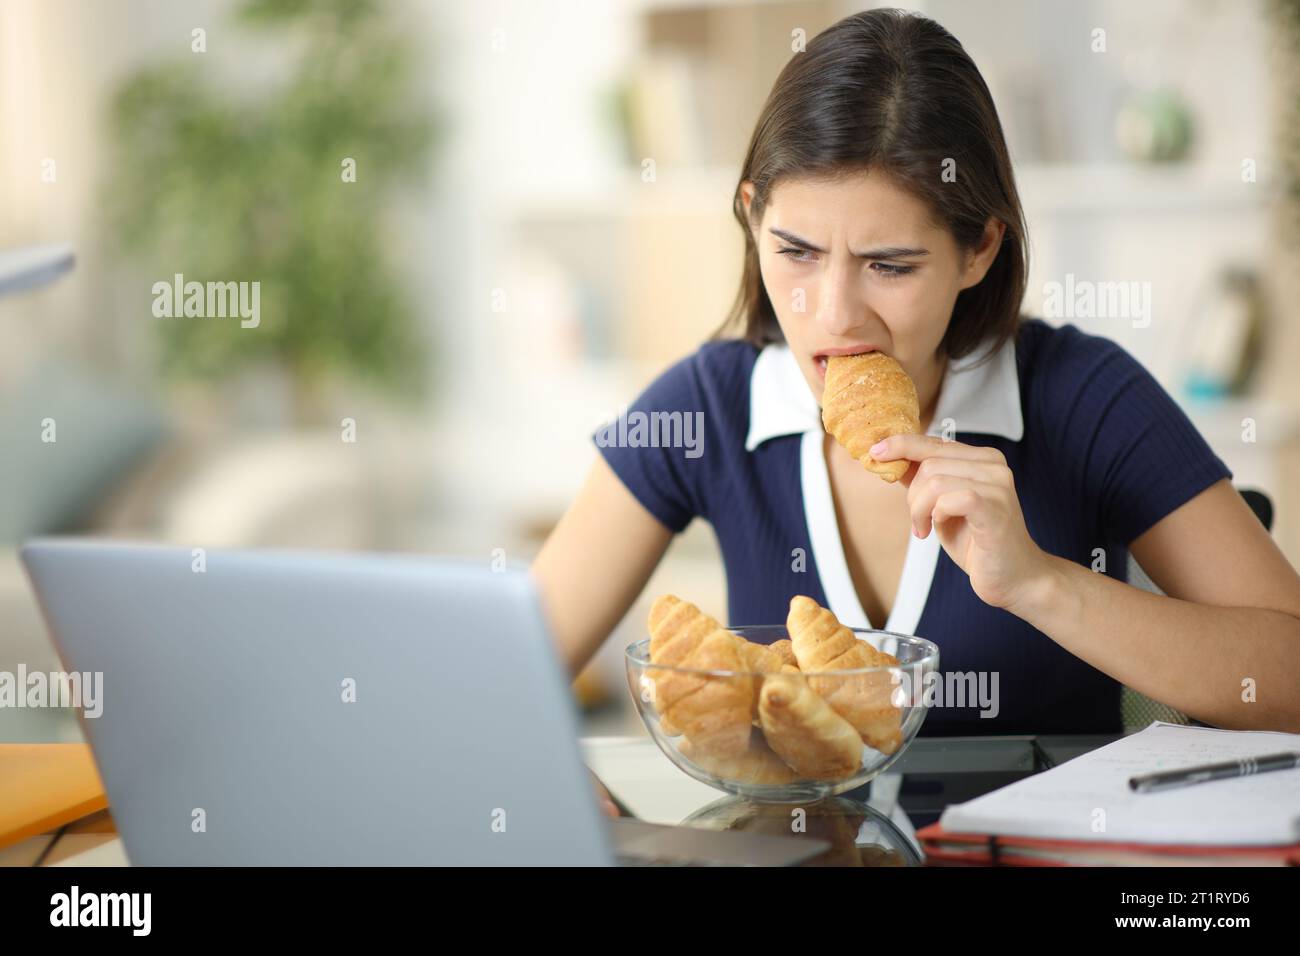 Glutton anxious student eating and studying online at home Stock Photo